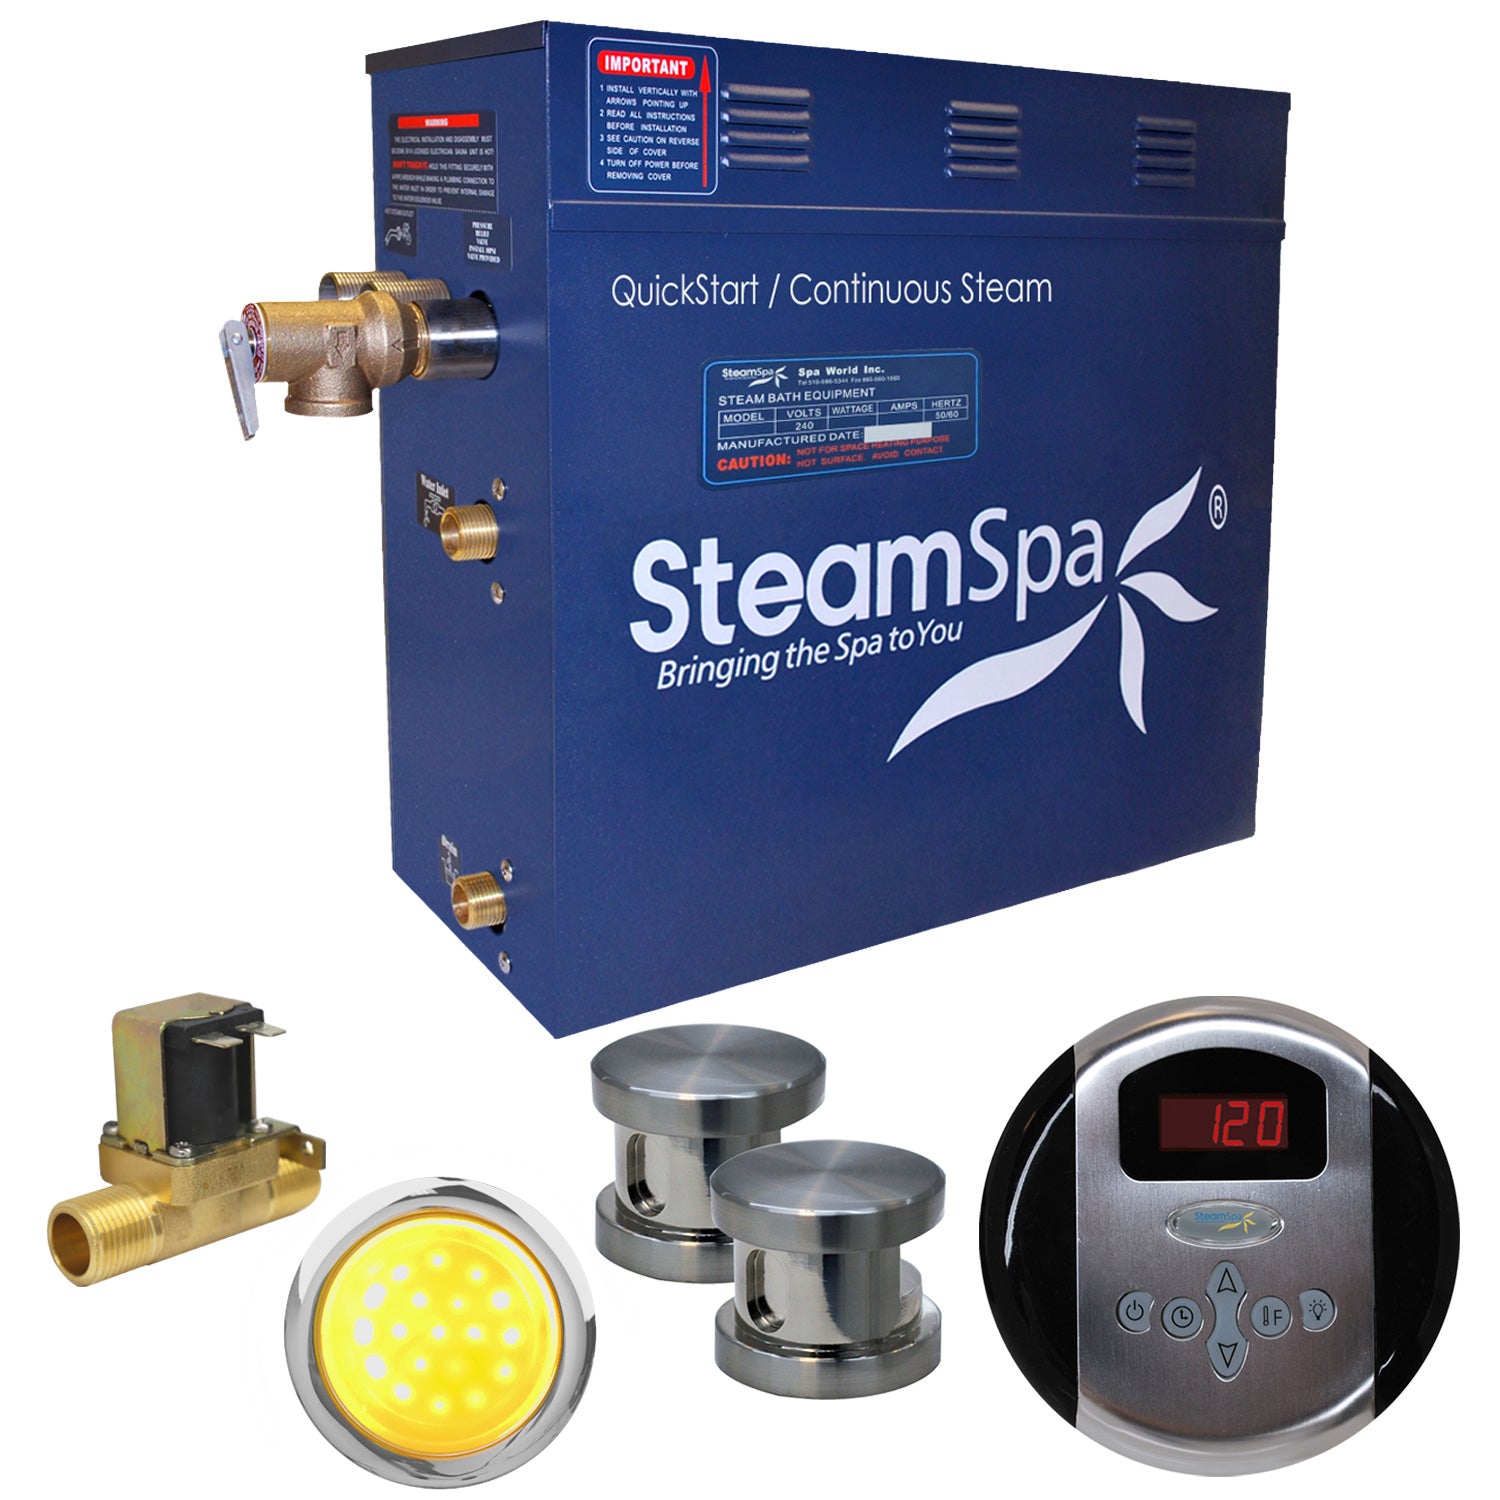 SteamSpa Indulgence 10.5 KW QuickStart Acu-Steam Bath Generator Package - Stainless Steel - Brushed Nickel - 9.5 in. L x 17 in. W x 15 in. H - Includes a 10.5kW QuickStart Acu-Steam Bath Generator, Control Panel or Touch Pad Control Panel, Two Brushed Nickel Steam heads, Chroma therapy three color mode LED light, Pressure Relief Valve - IN1050 - Vital Hydrotherapy